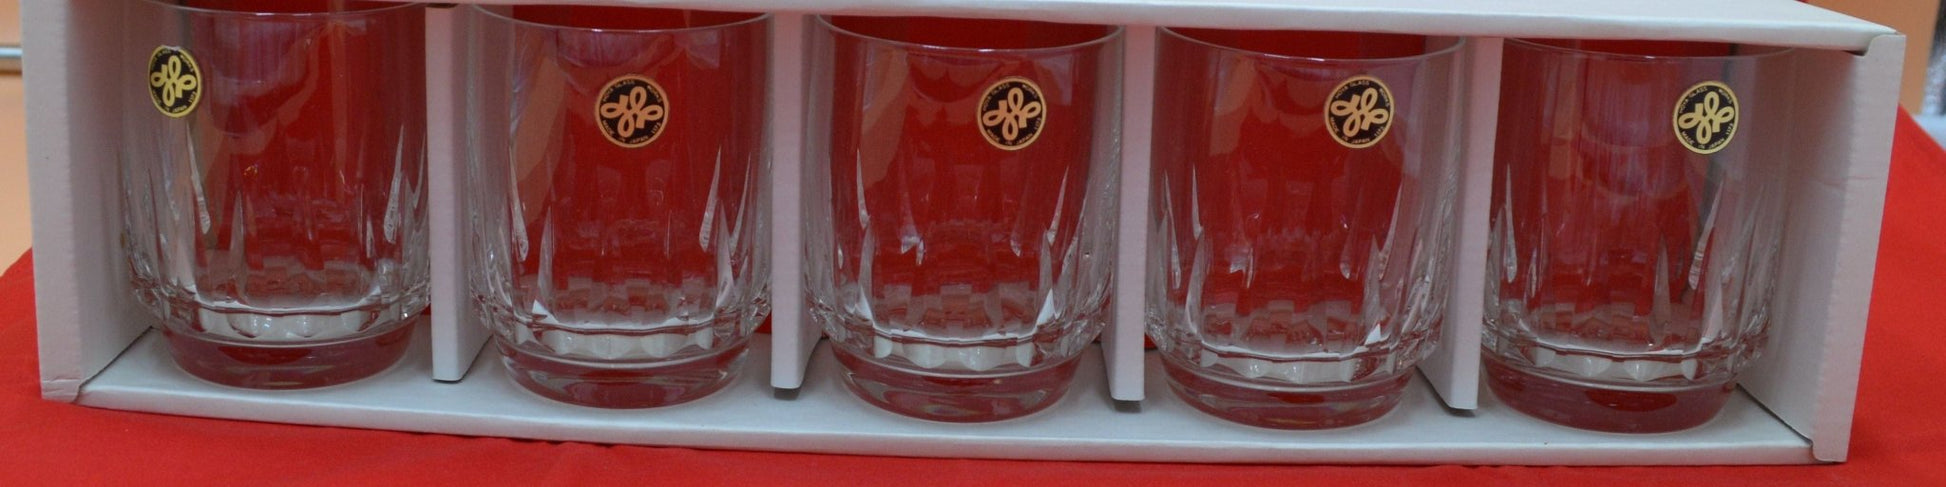 DRINKING GLASSES HOYA BOXED SET OF 5 CRYSTAL GLASS TUMBLERS - TMD167207